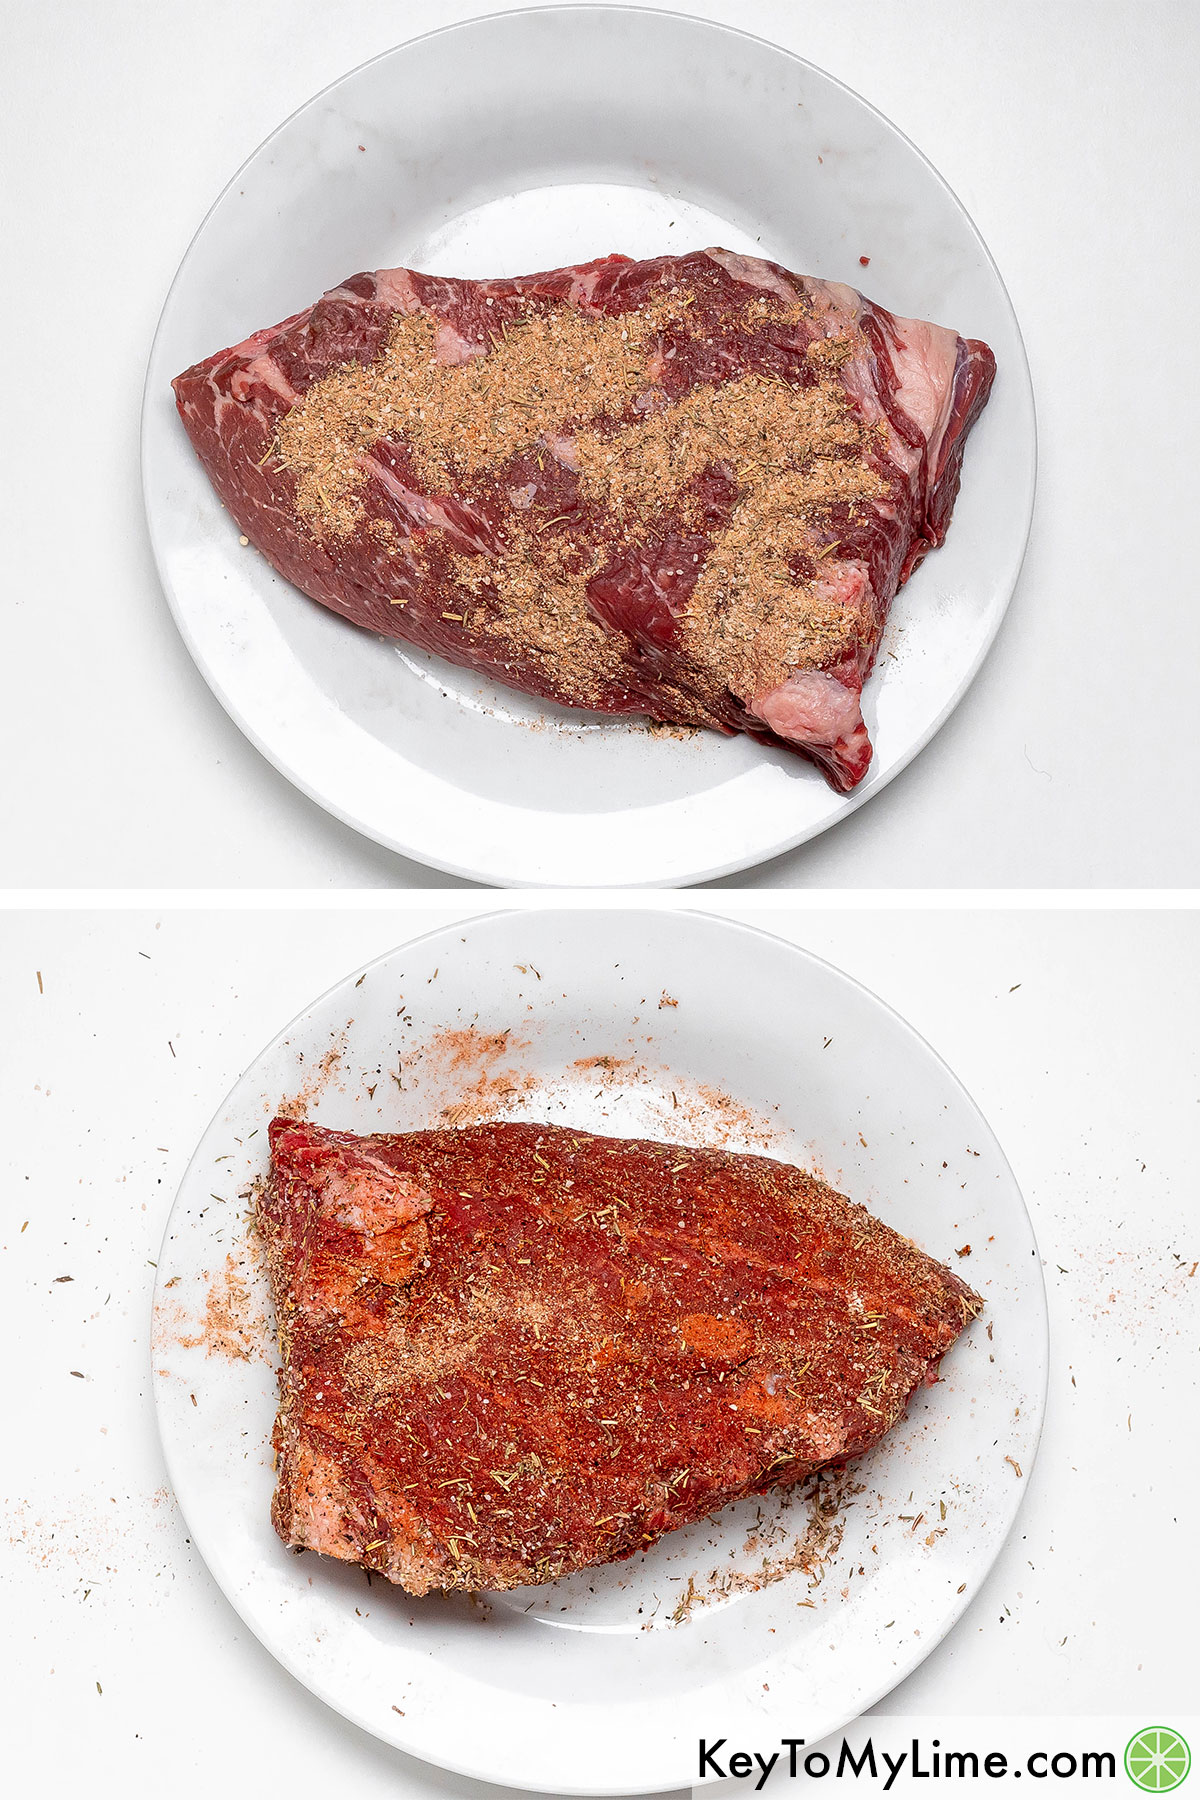 Applying the dry rub, and then massaging the roast until fully coated.